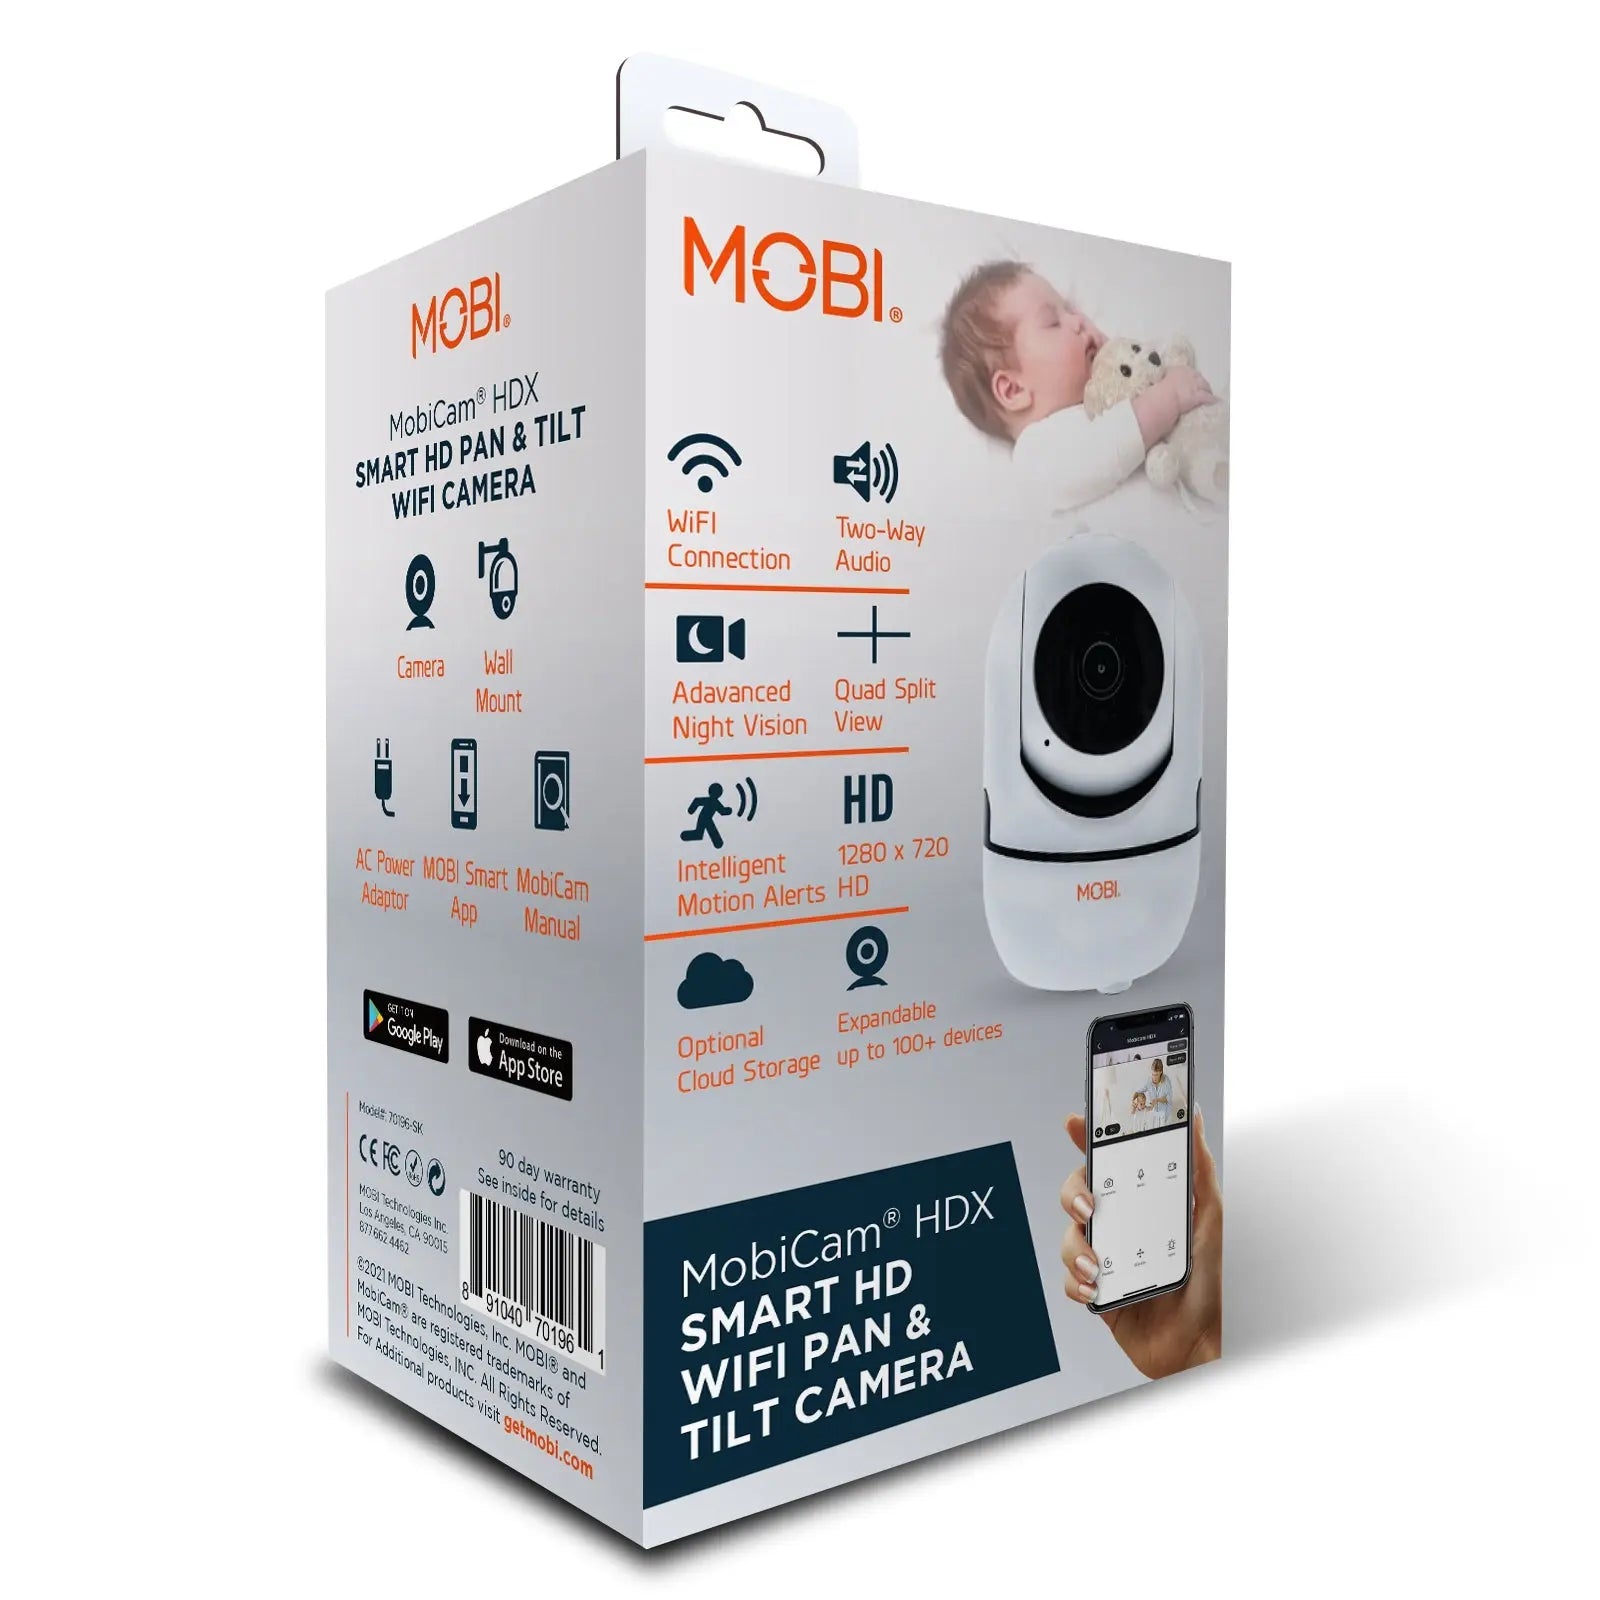 MOBI Presents MobiCam HDX, Delights Customers With Budget-Friendly Prices - MOBI USA